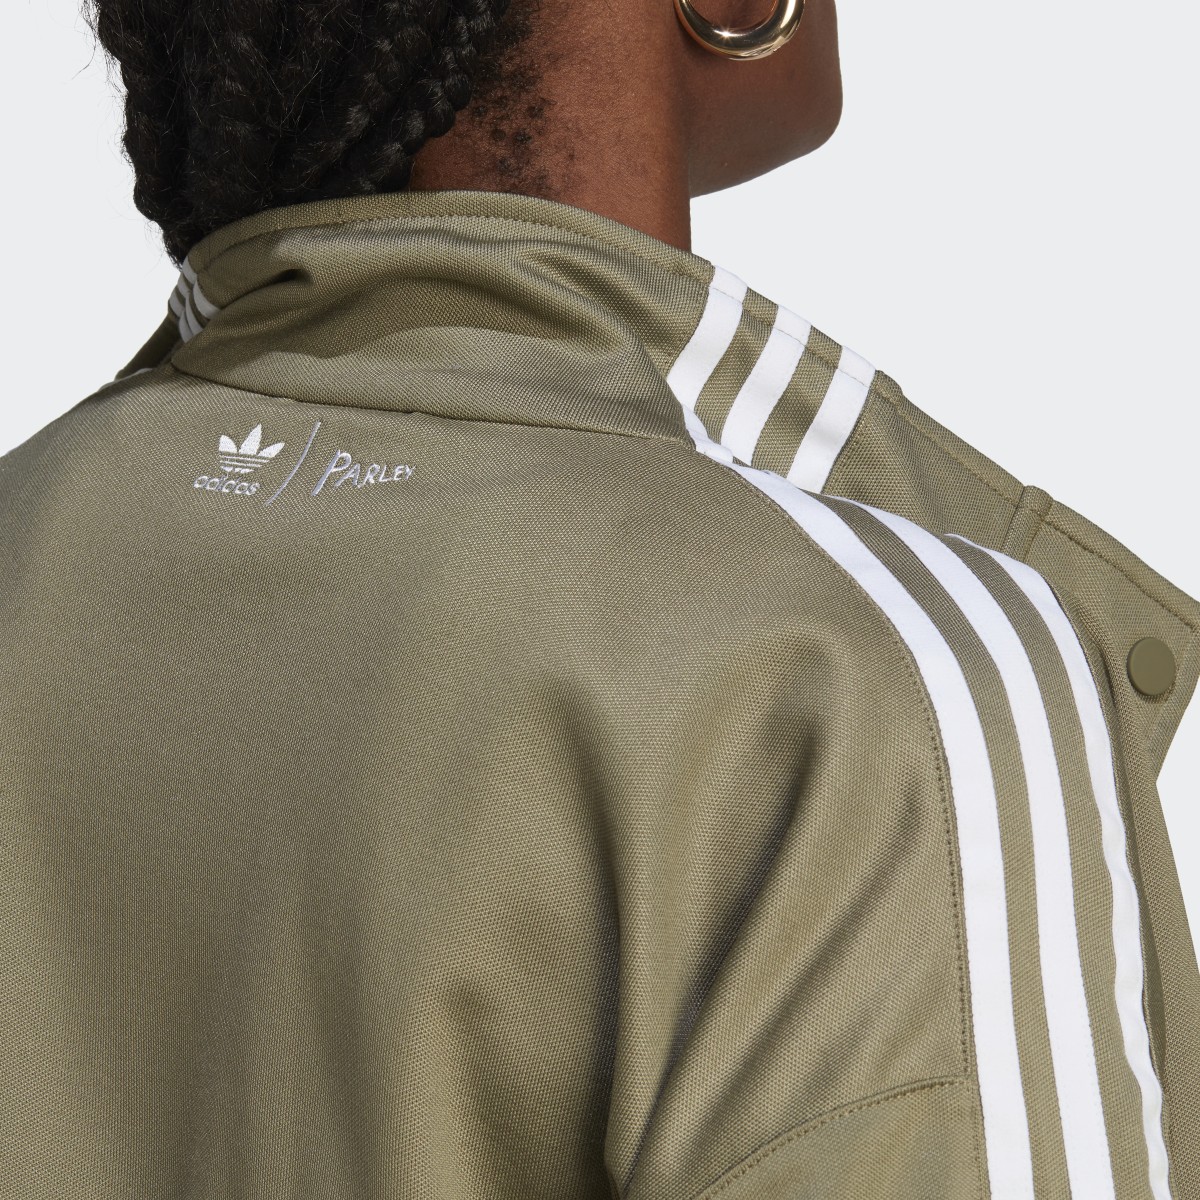 Adidas Parley Track Top. 6